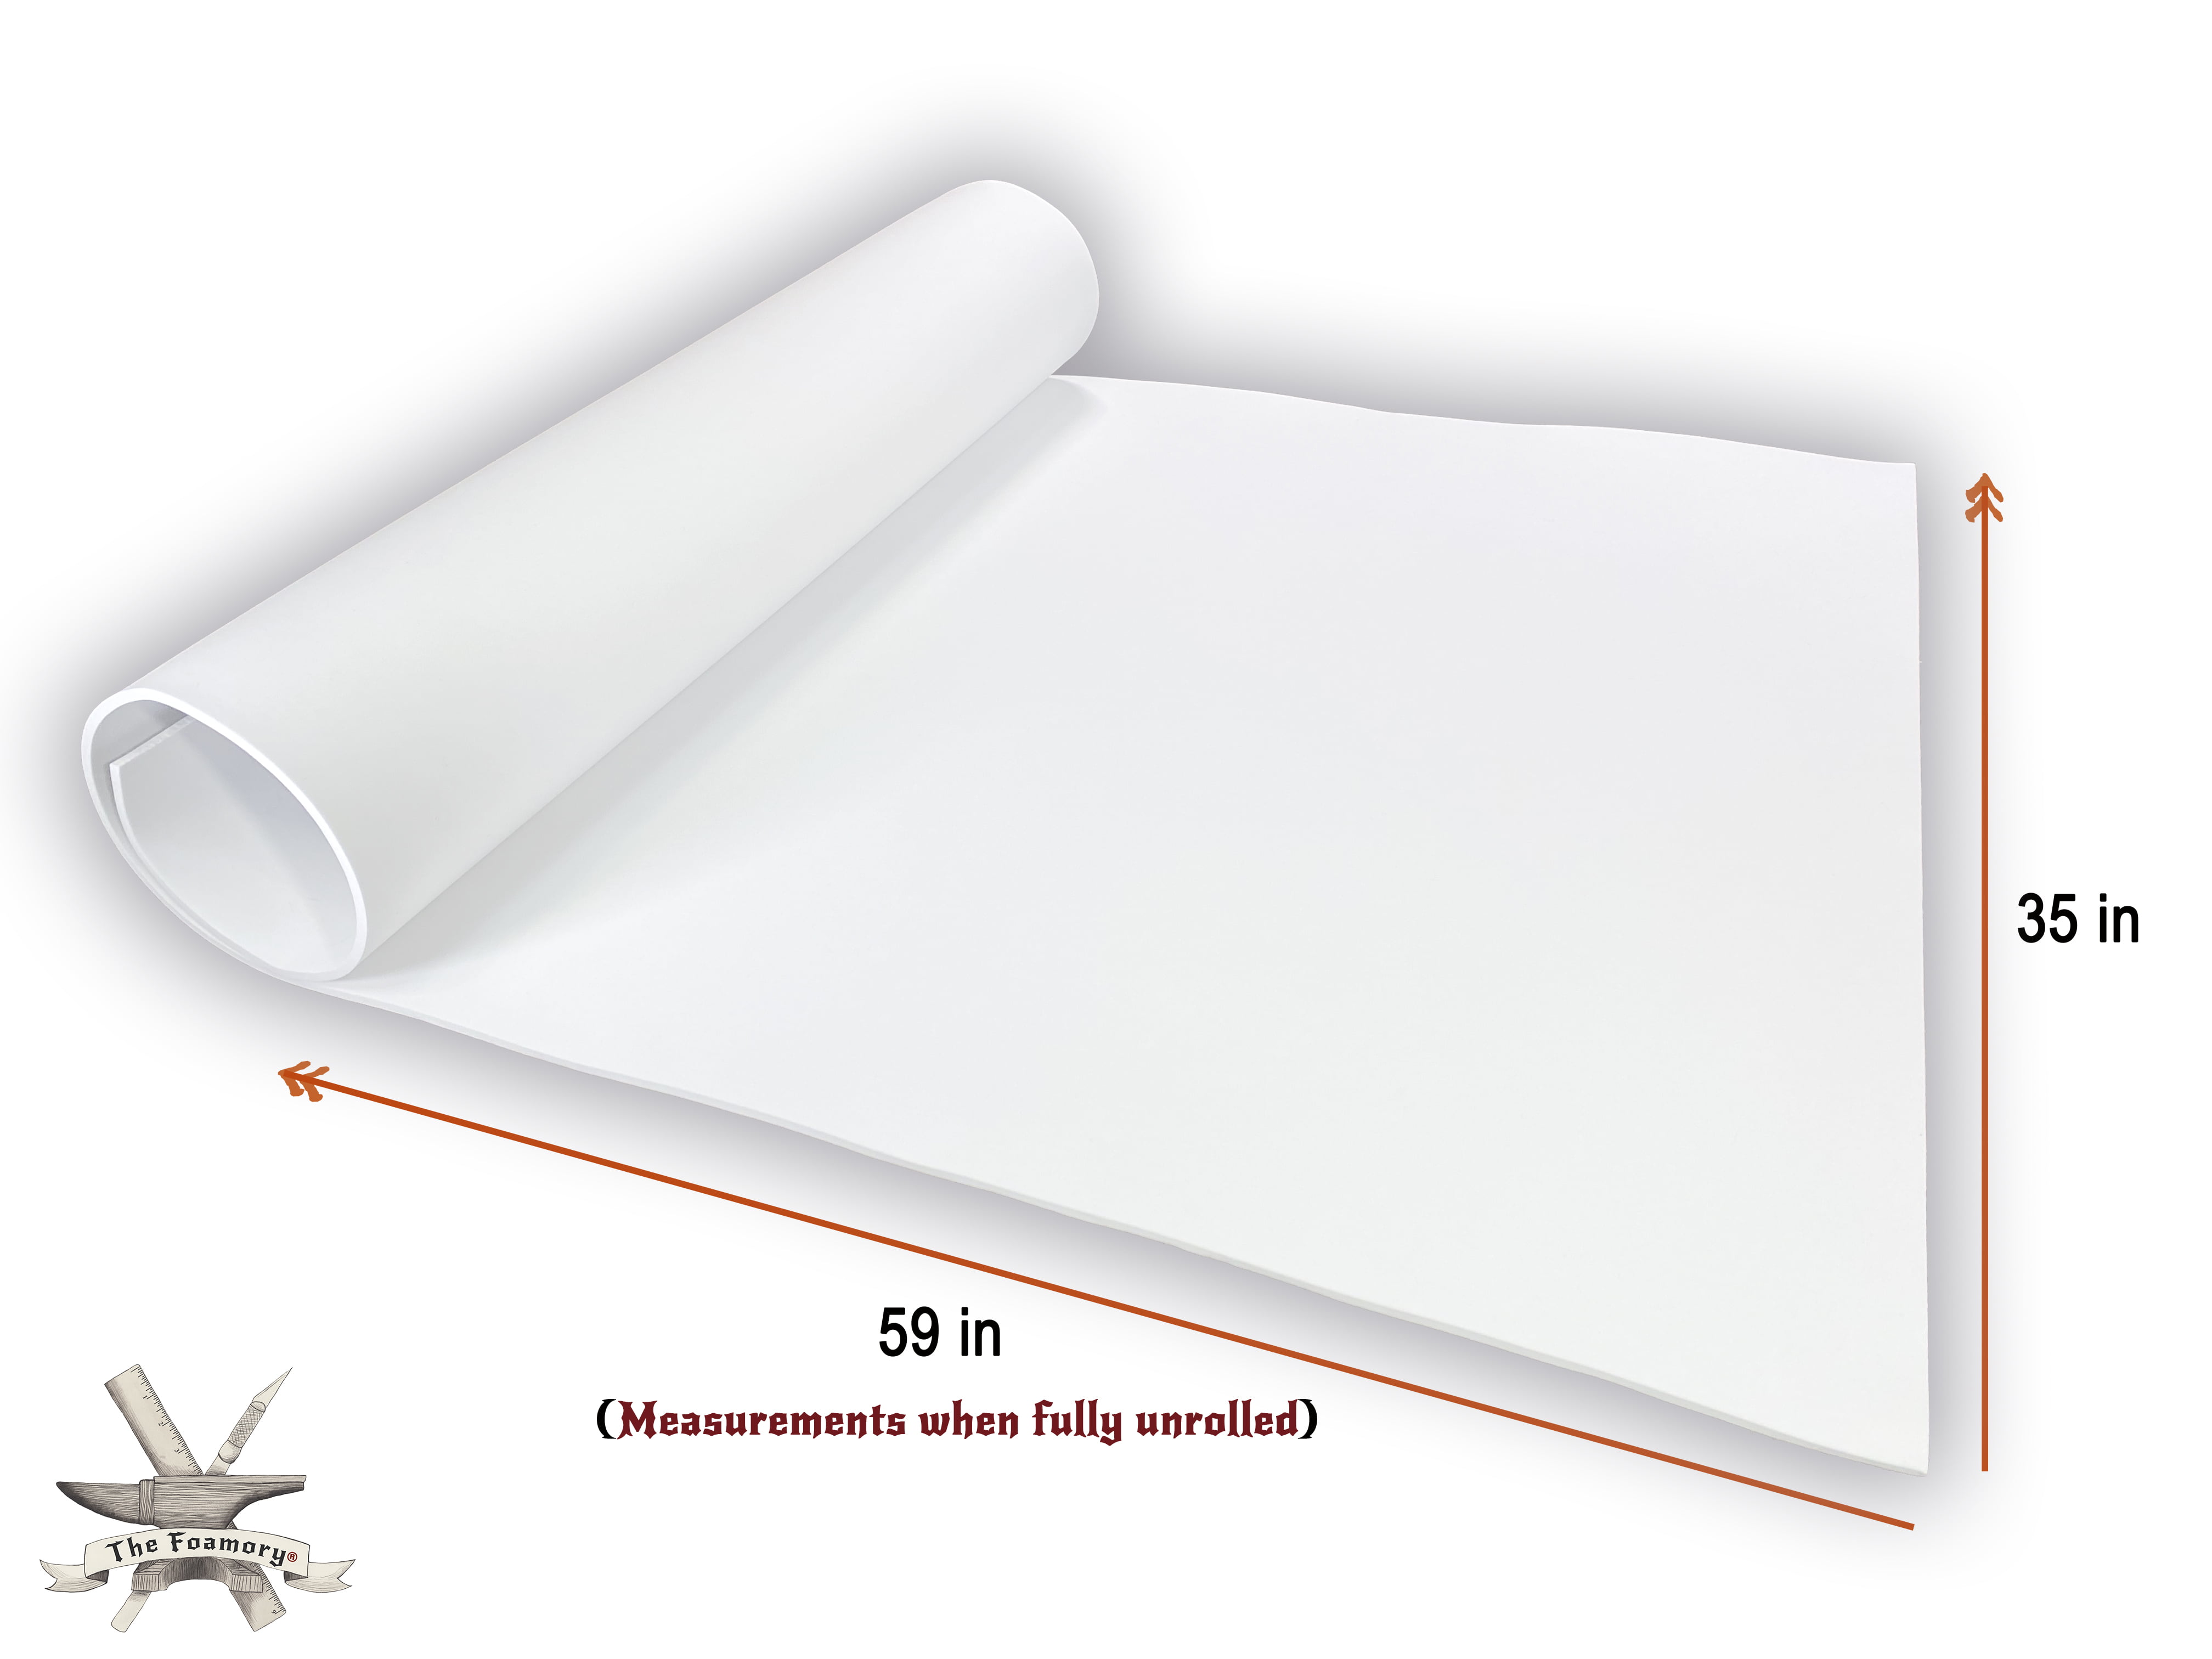 EVA Foam 2mm Thickness 14 X 39 Sheet, Black or White Options, Ultra High  Density 85 Kg/m3, by the Foamory for Cosplay Costumes Crafting 